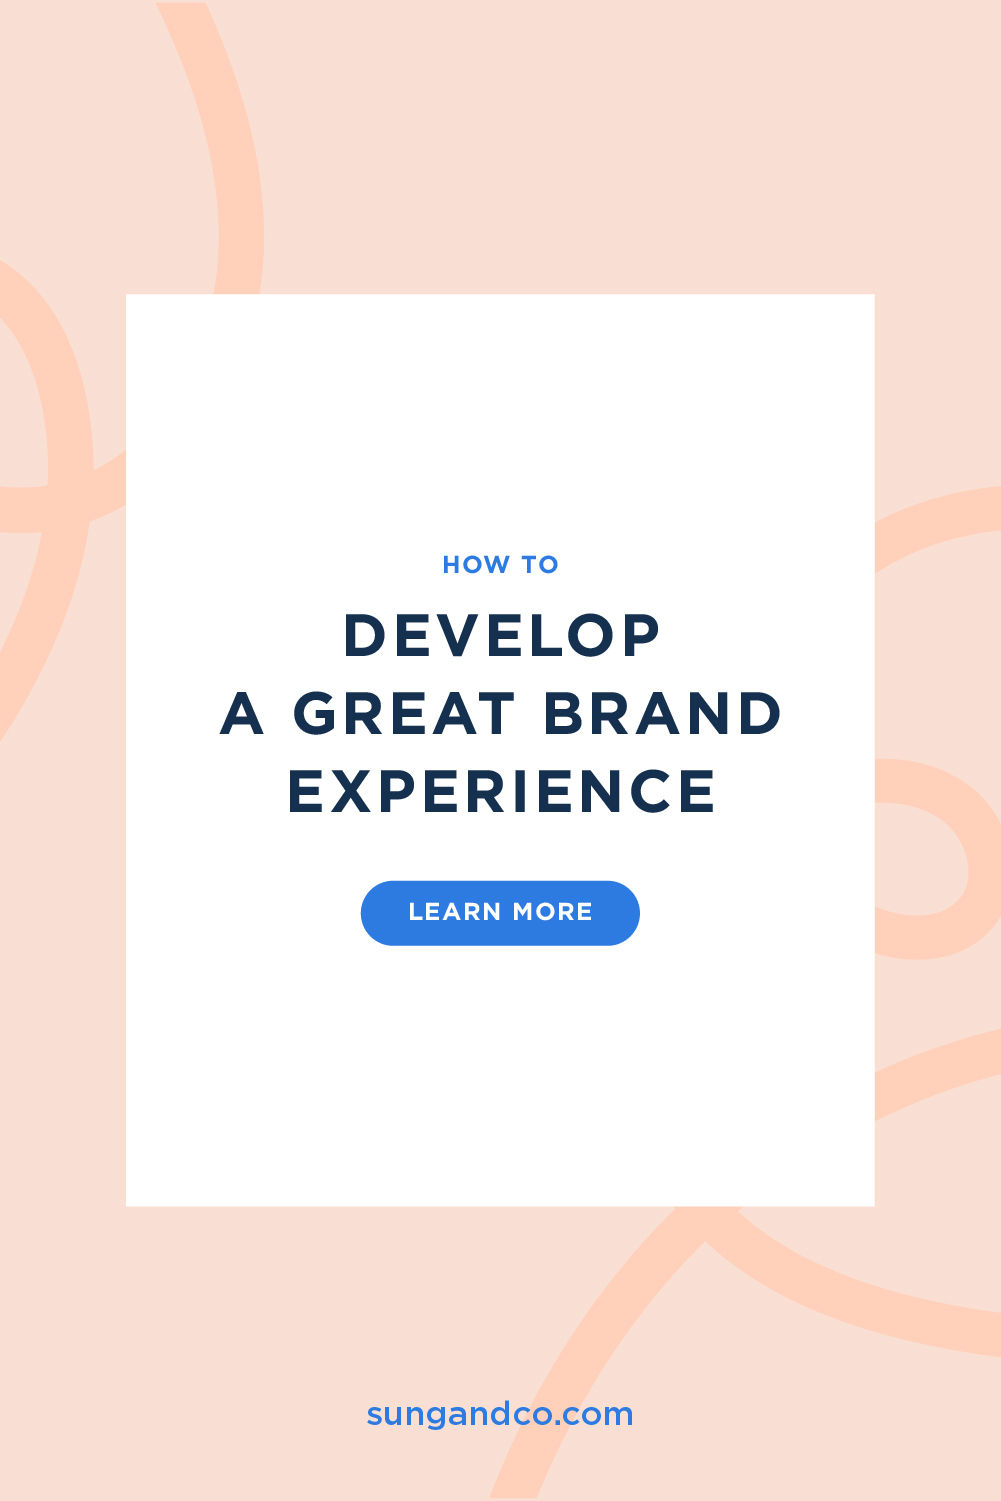 Learn from Sung and Co how to create a great brand experience-the what and the how.